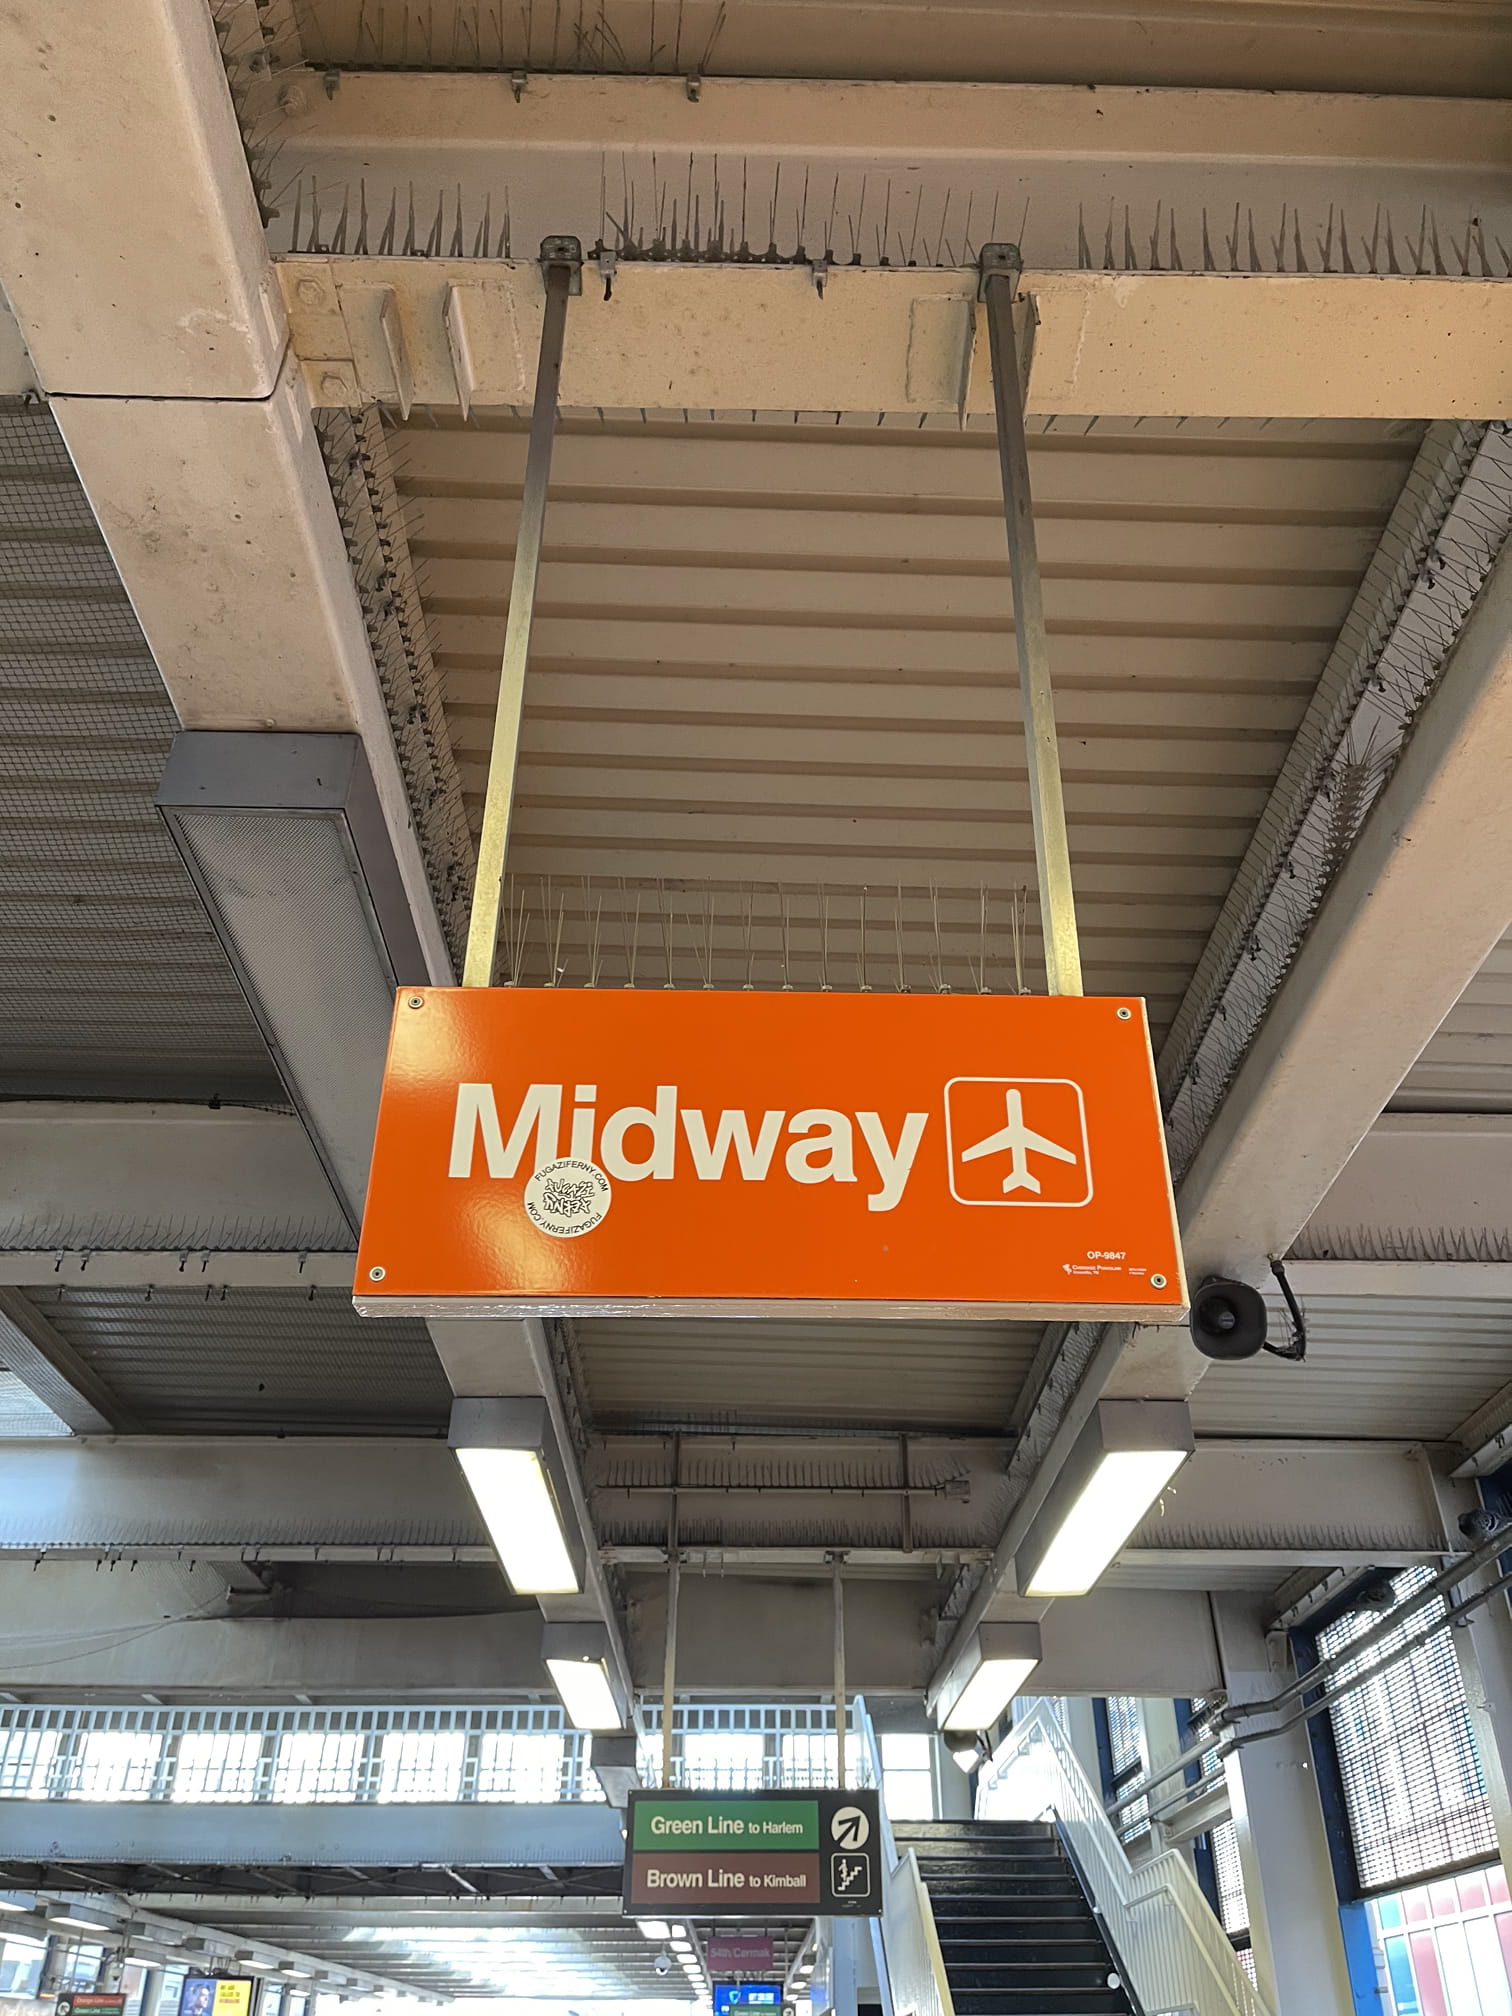 Sign for midway at clark and lake